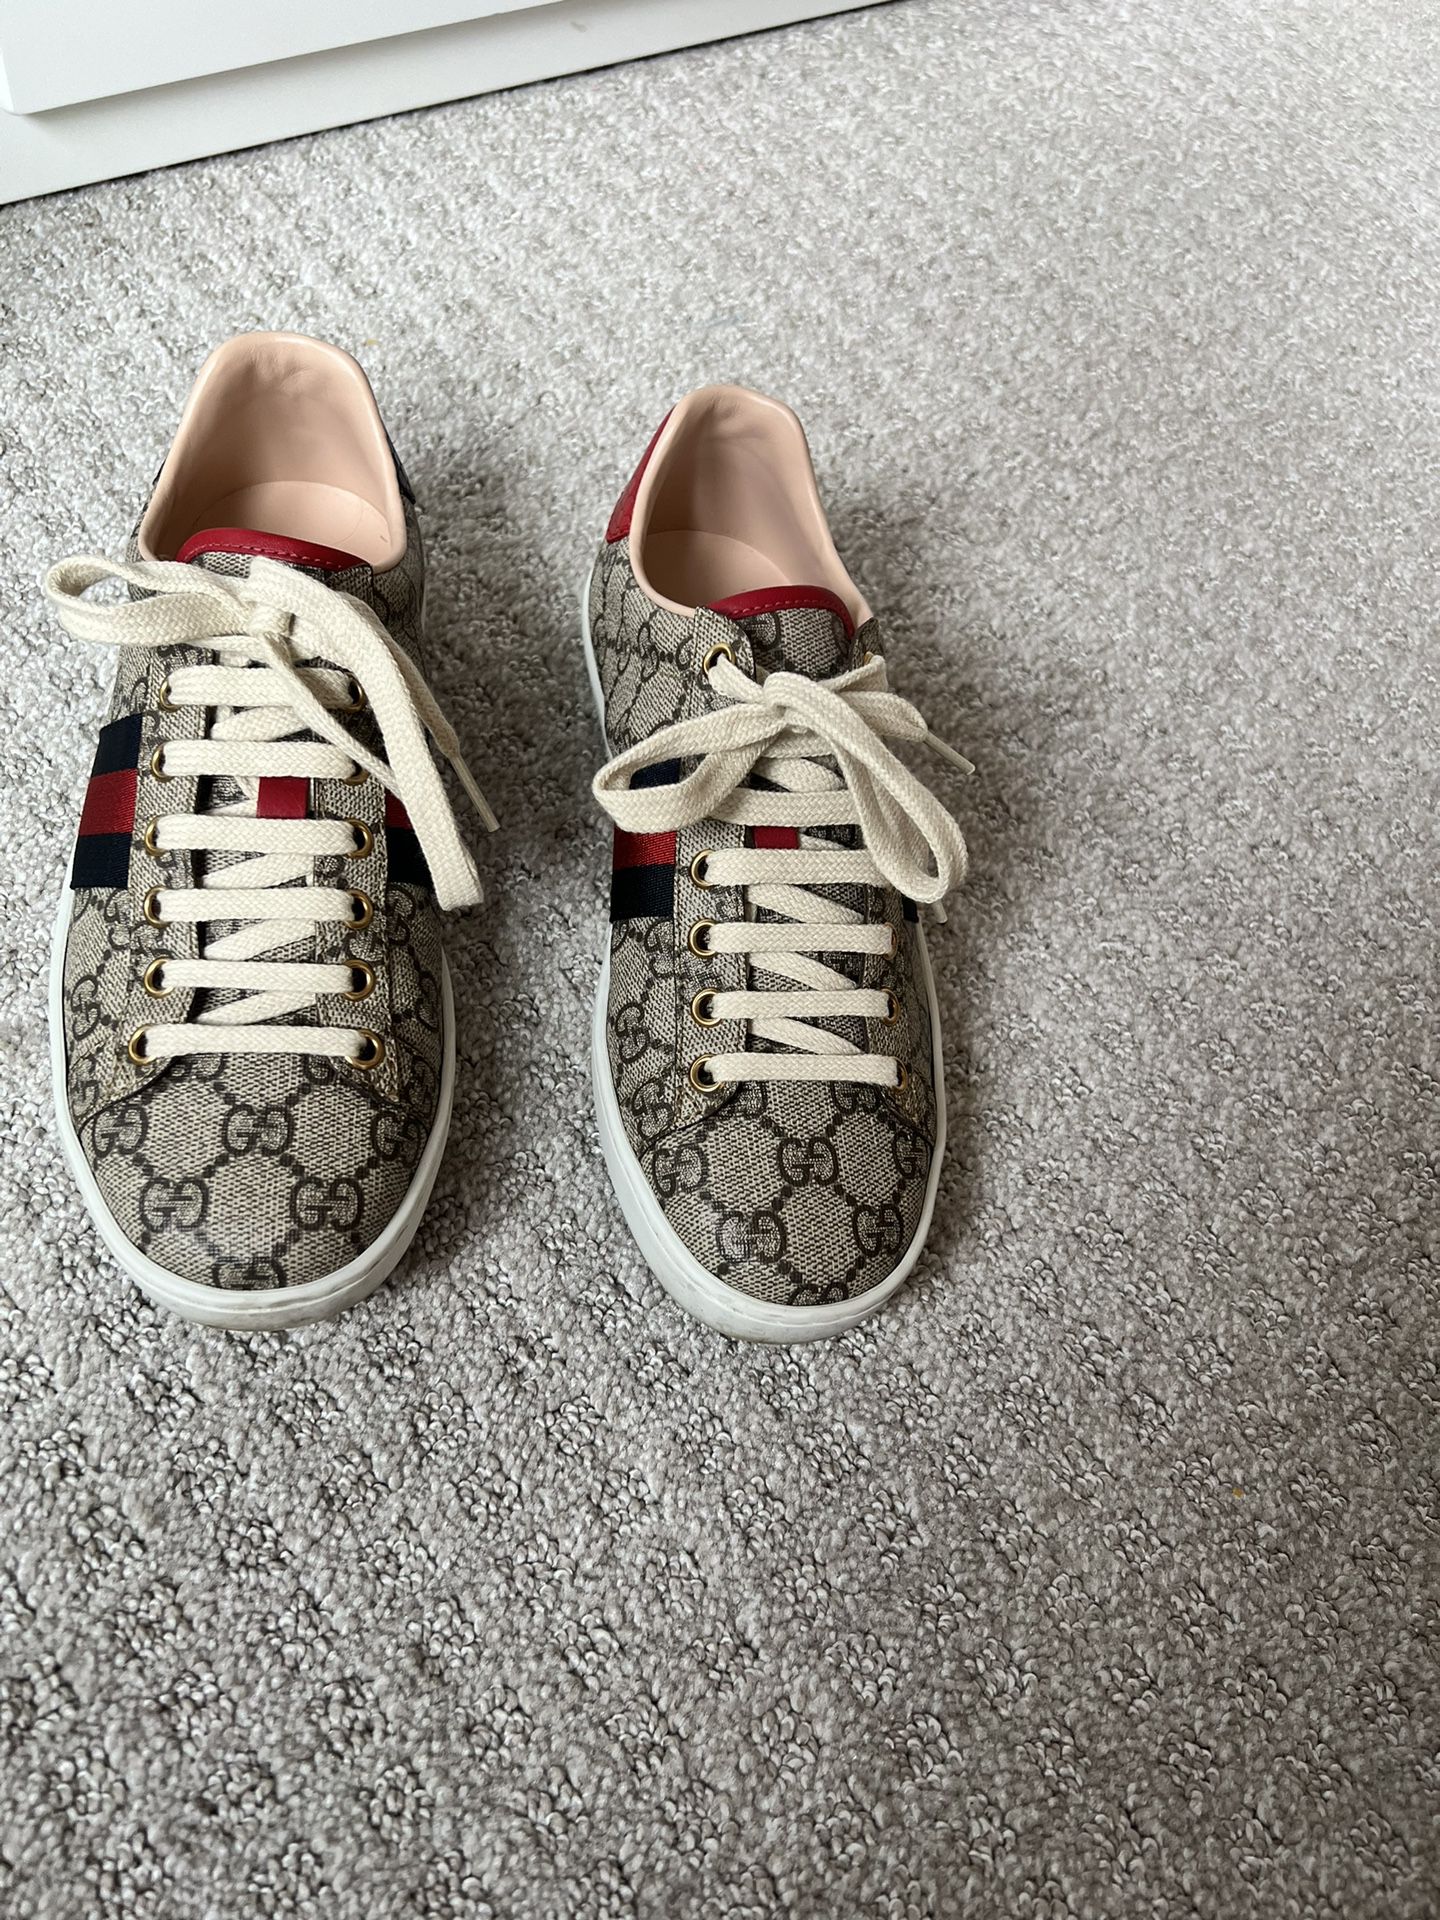 Gucci Sneakers Women’s Size 35, US 5